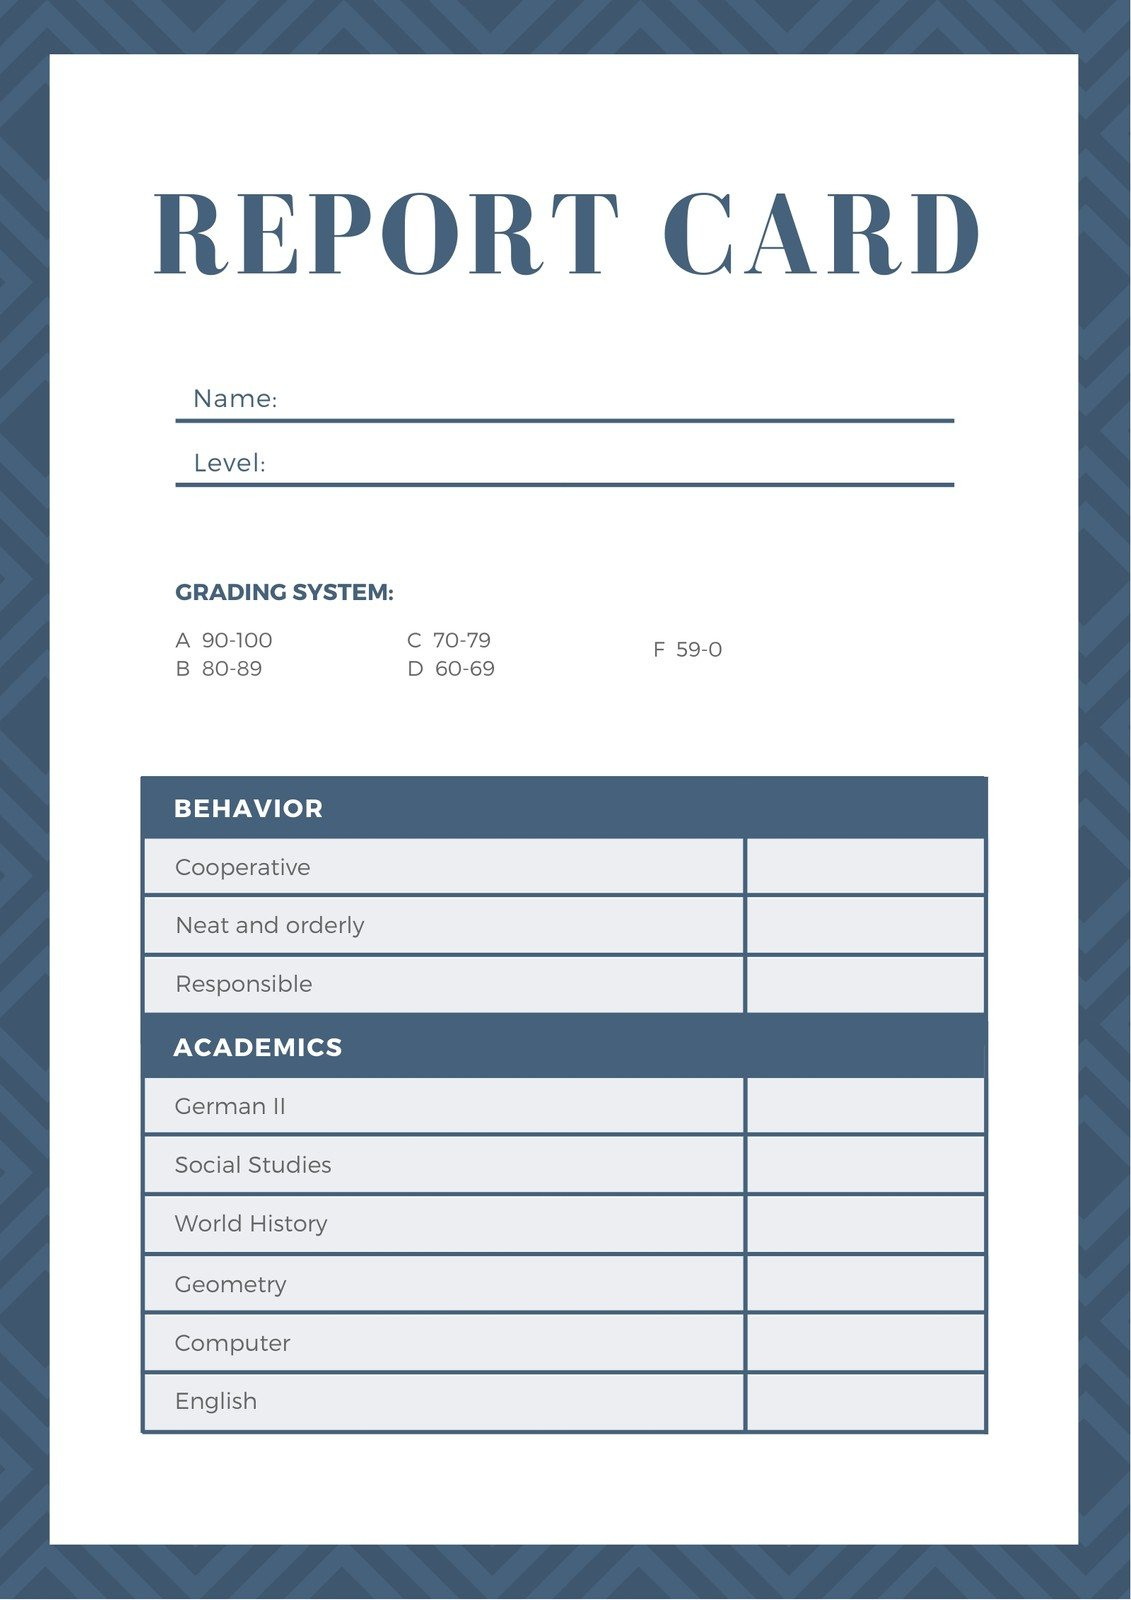 Free, Printable, Customizable Report Card Templates | Canva for Free Printable Grade Cards